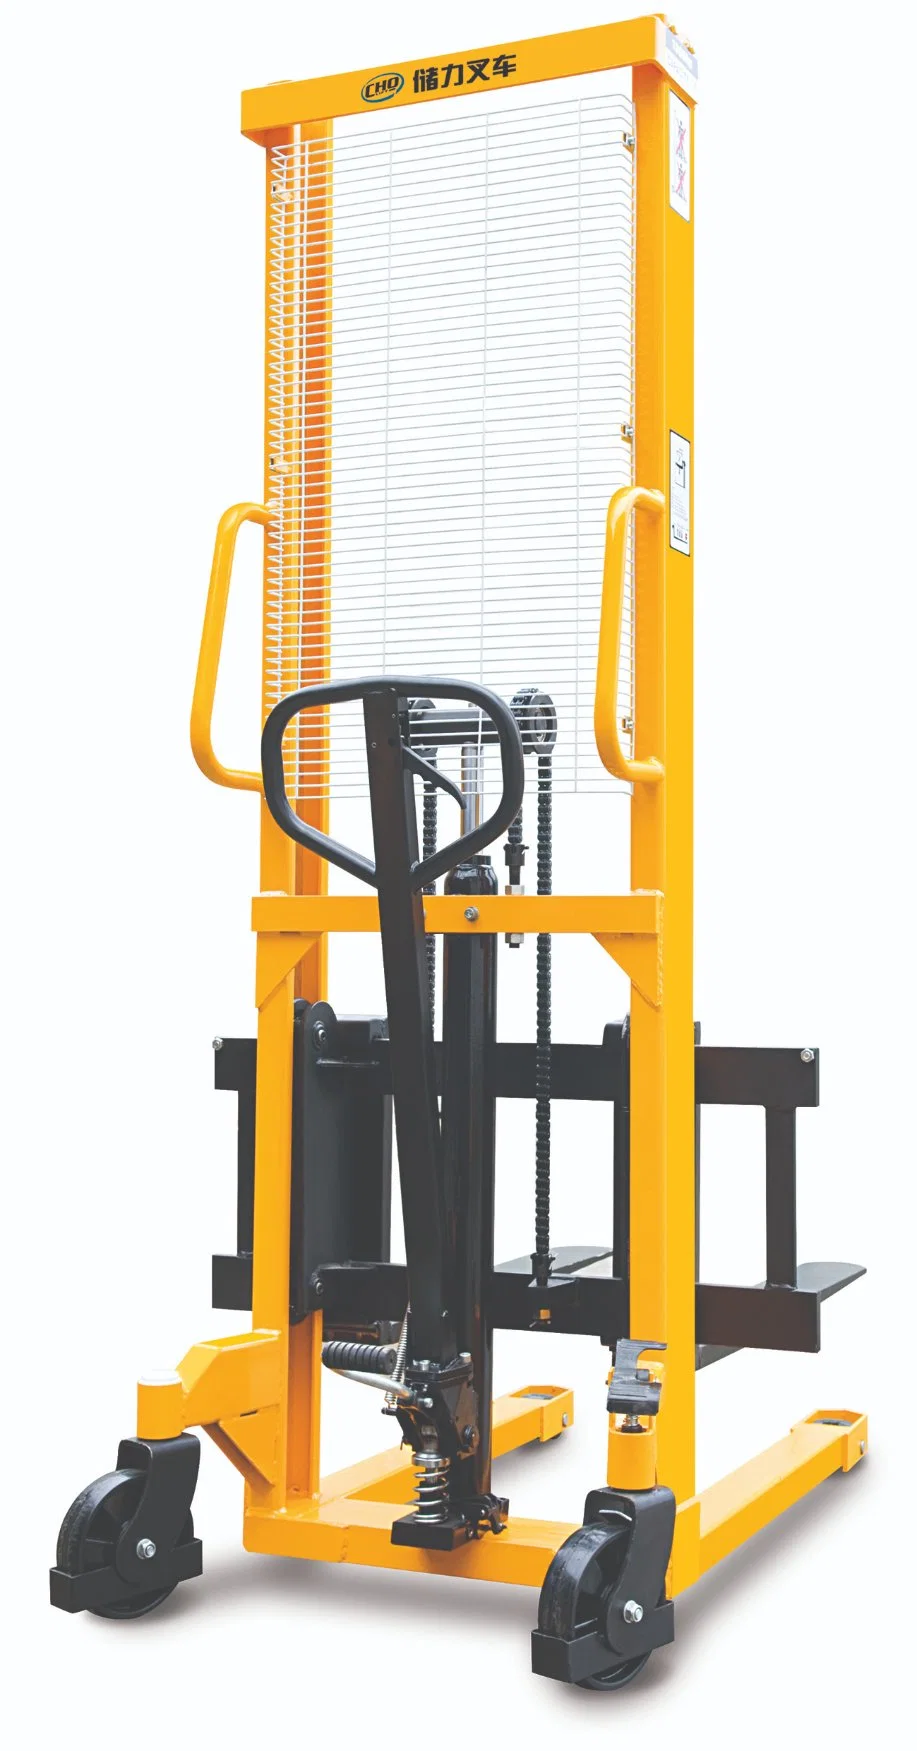 Ningbo Hand Pallet Stacker 1500kg 1600mm Lifting Height